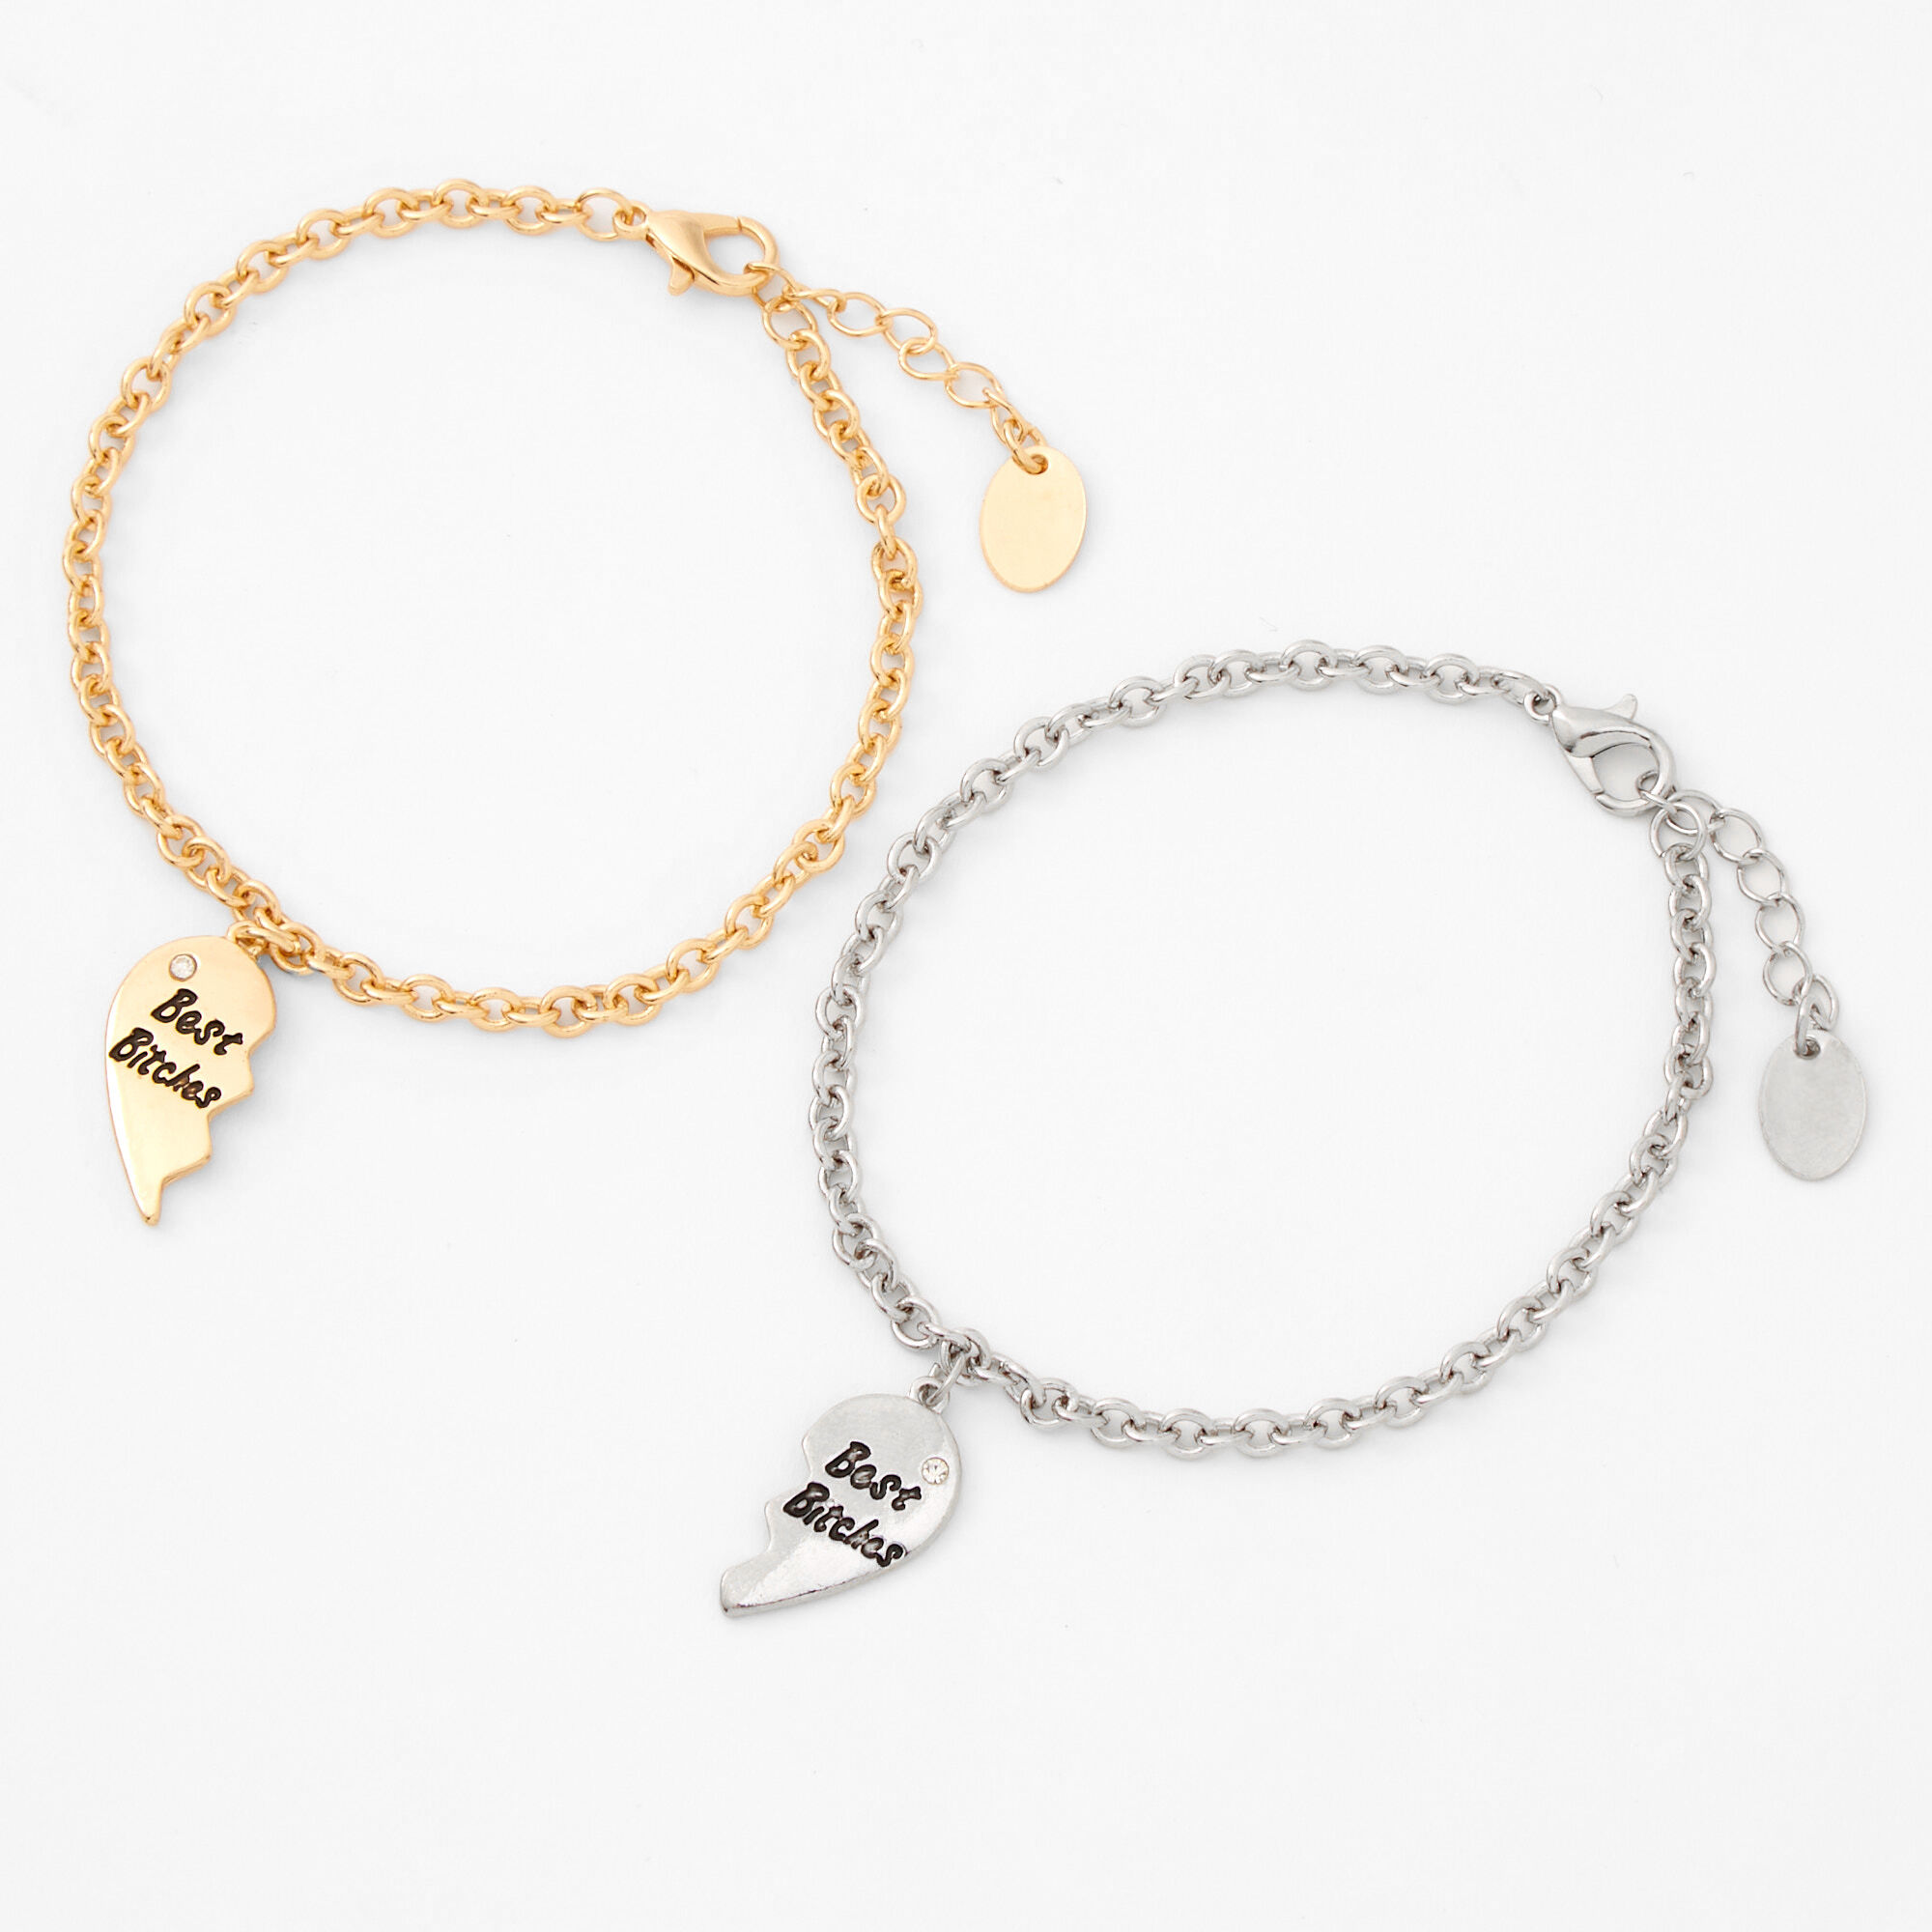 Bestie Wish String Bracelet set with Tibetan silver handcuff charms. F –  Charms So Charming